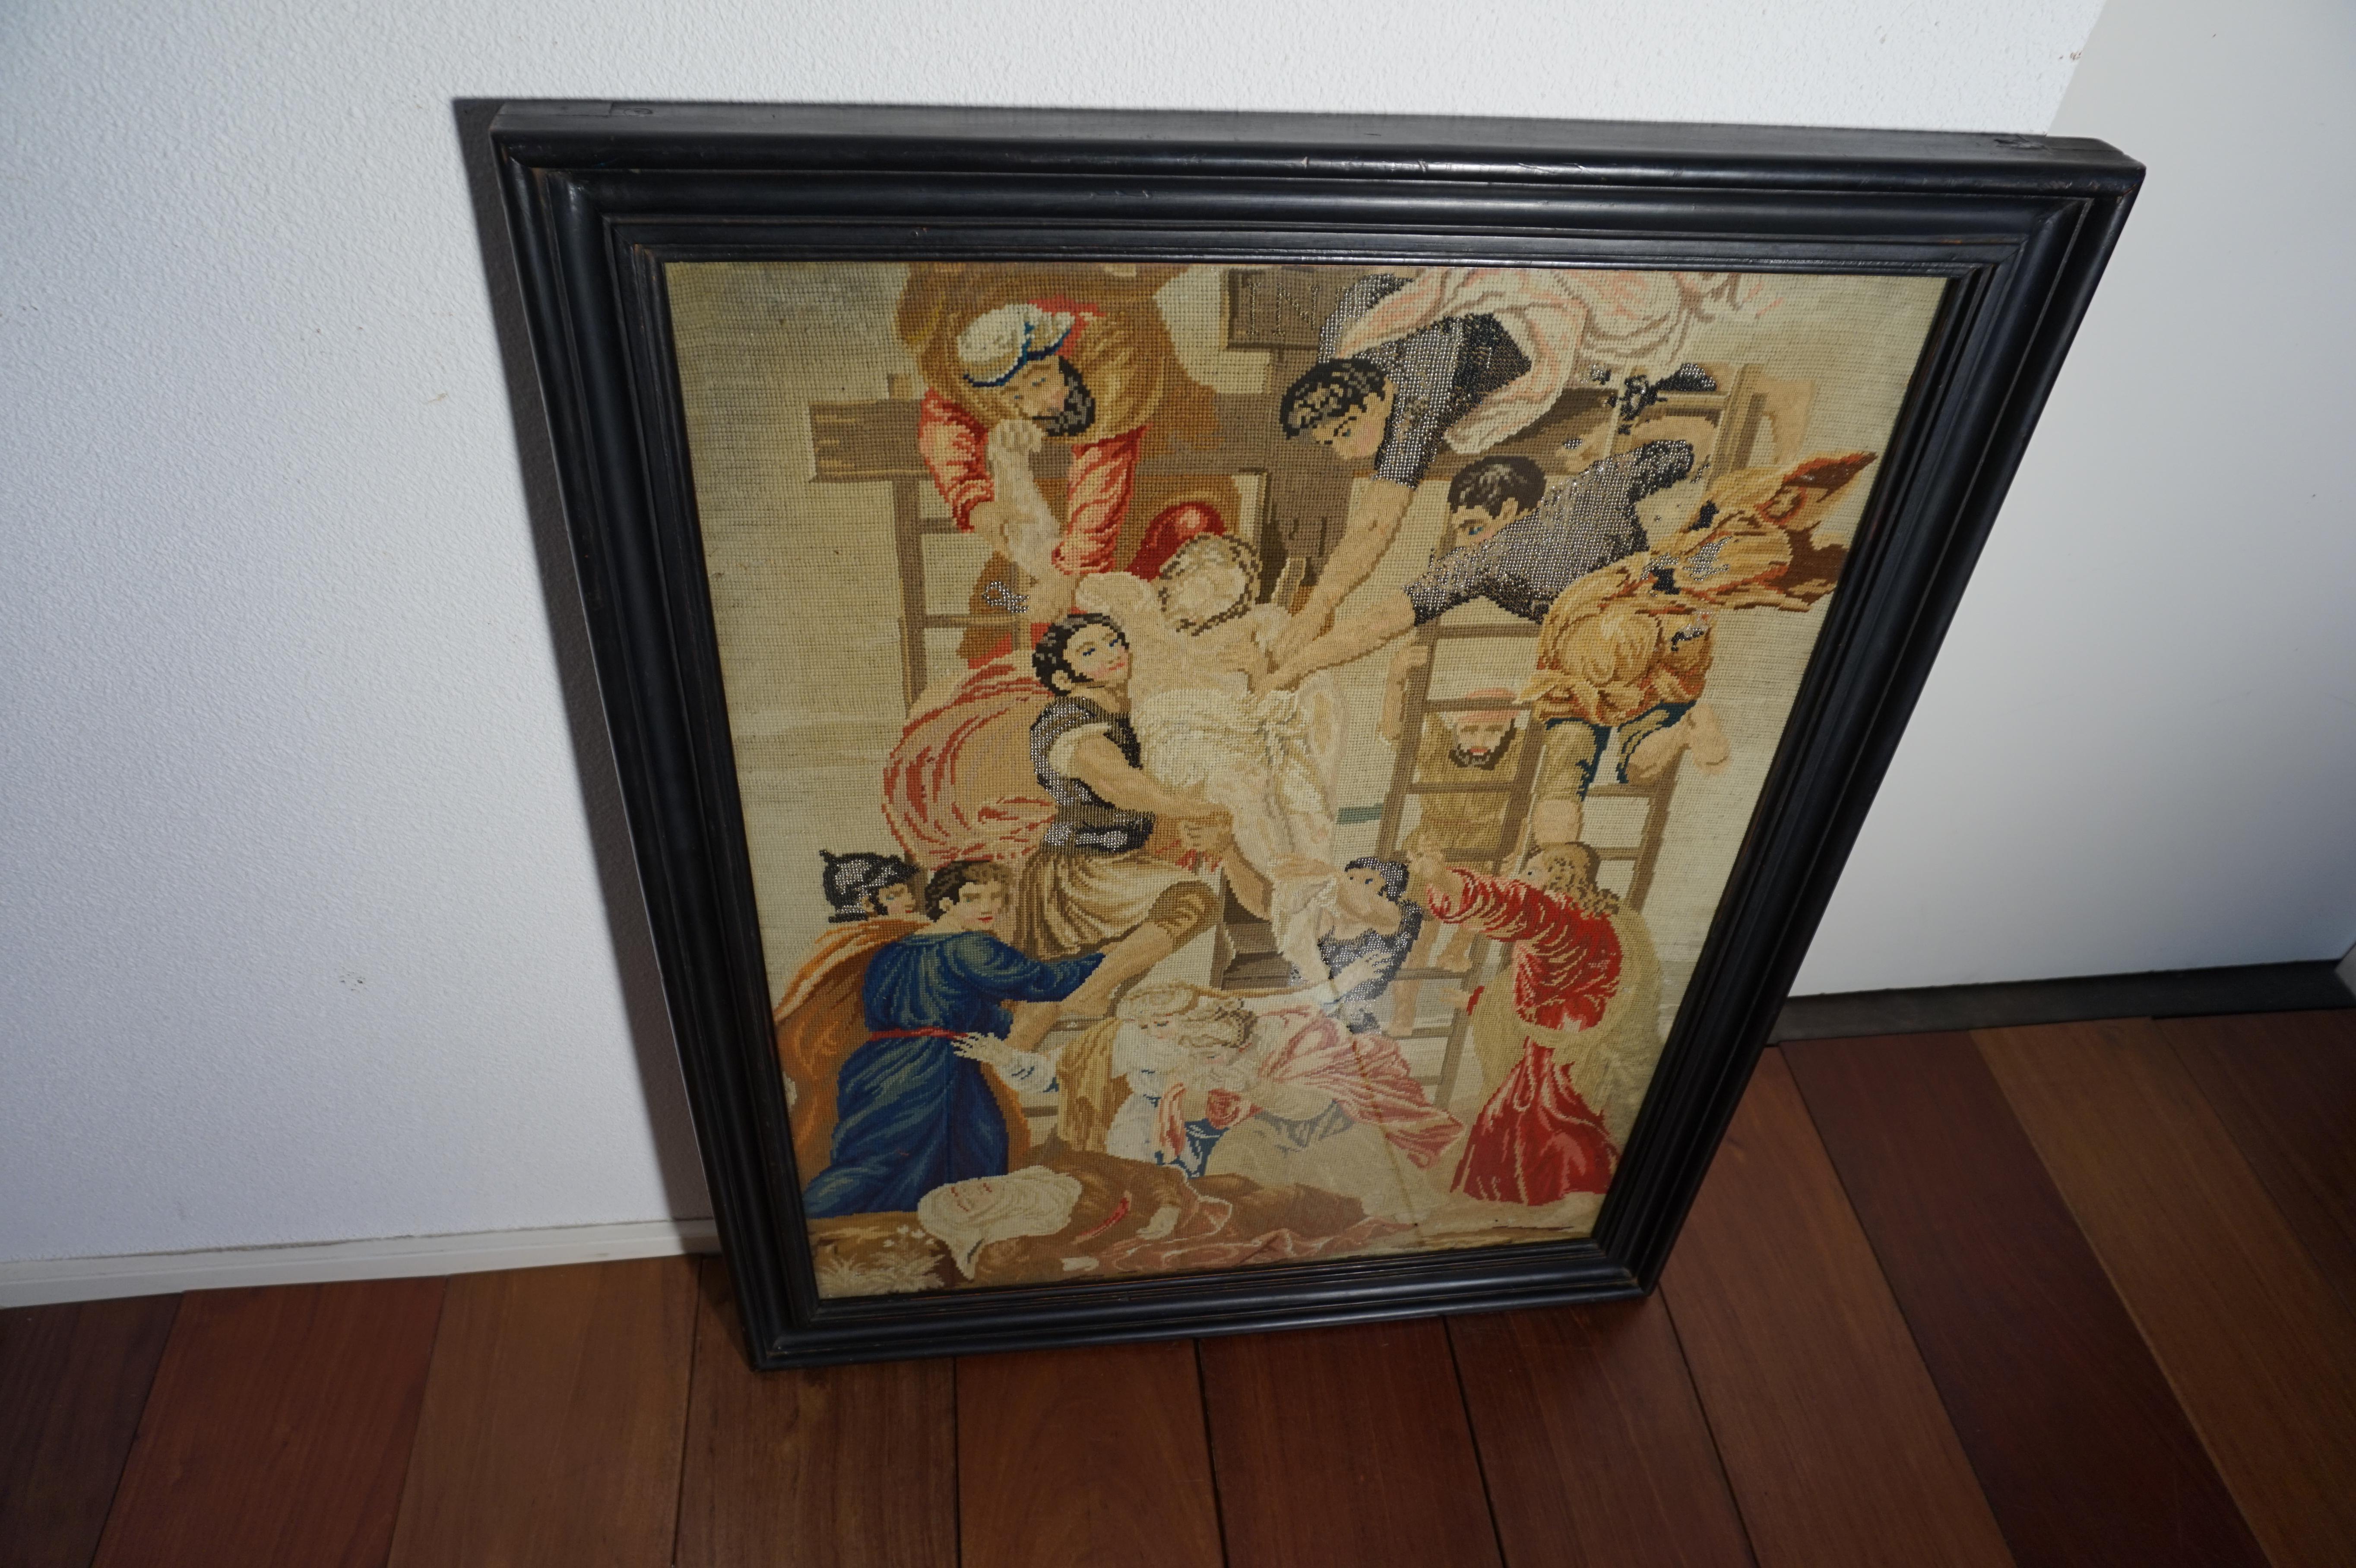 Renaissance Revival Stunning Mid-1800s Handcrafted Embroidery of Jesus' Descent from the Cross For Sale